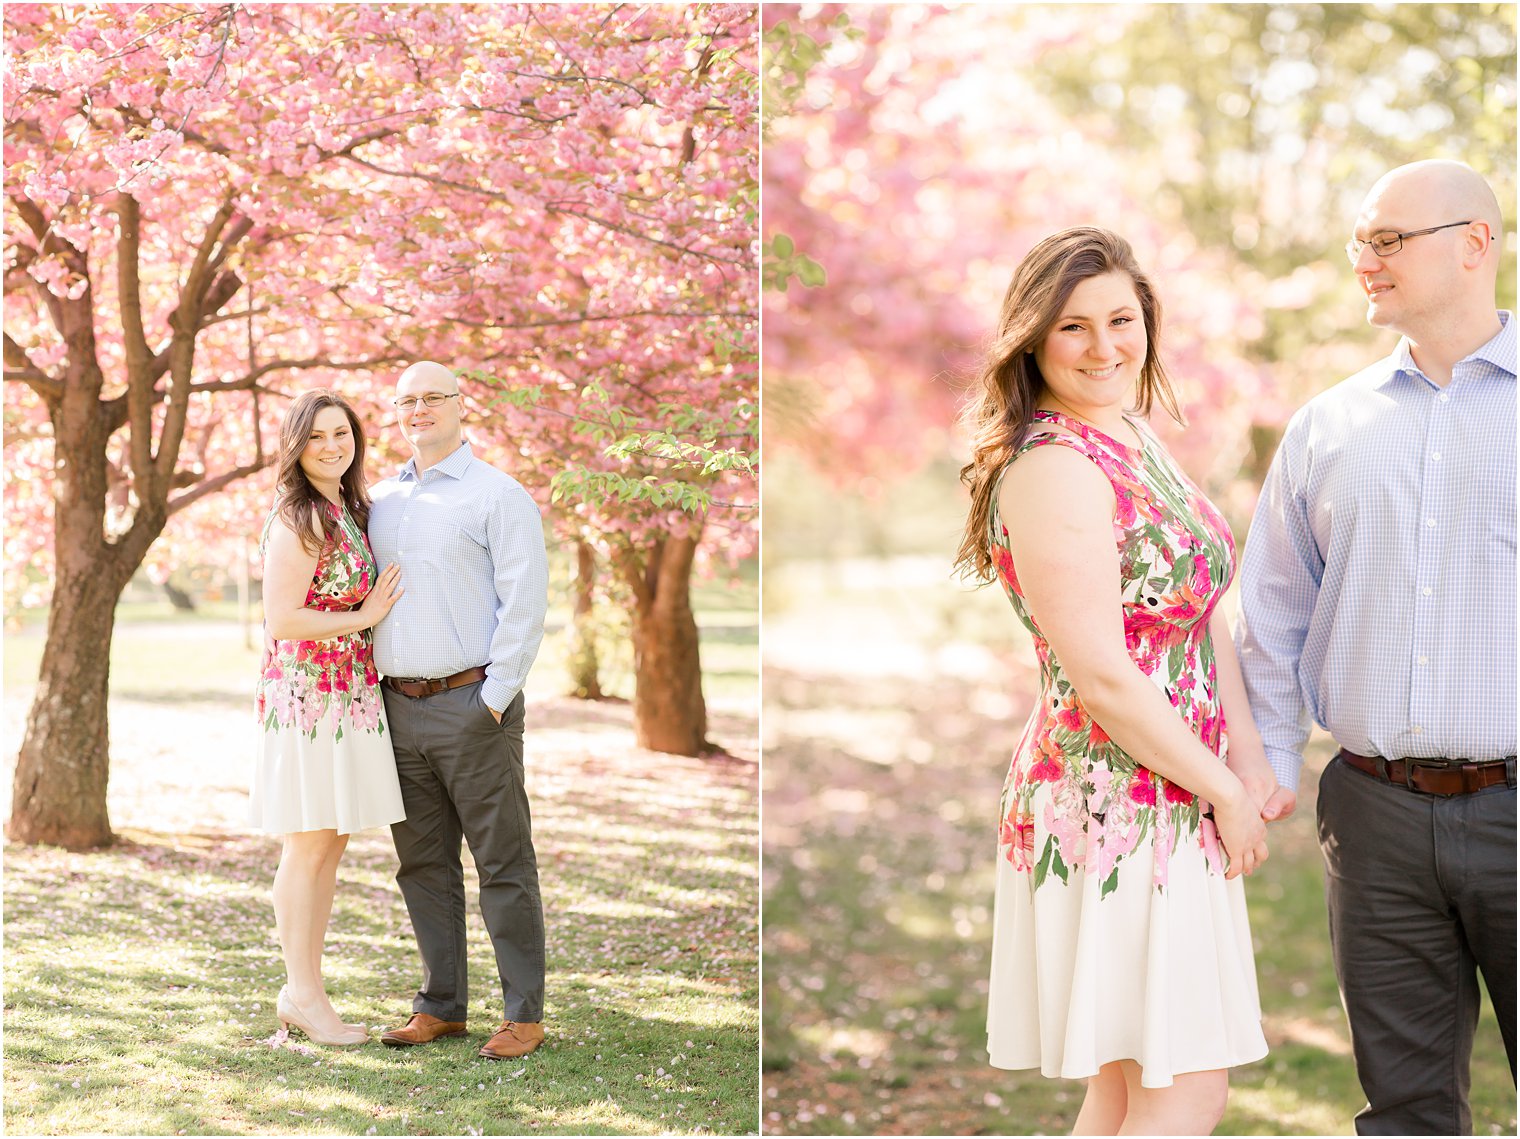 Woman wearing floral dress for cherry blossom engagement photos